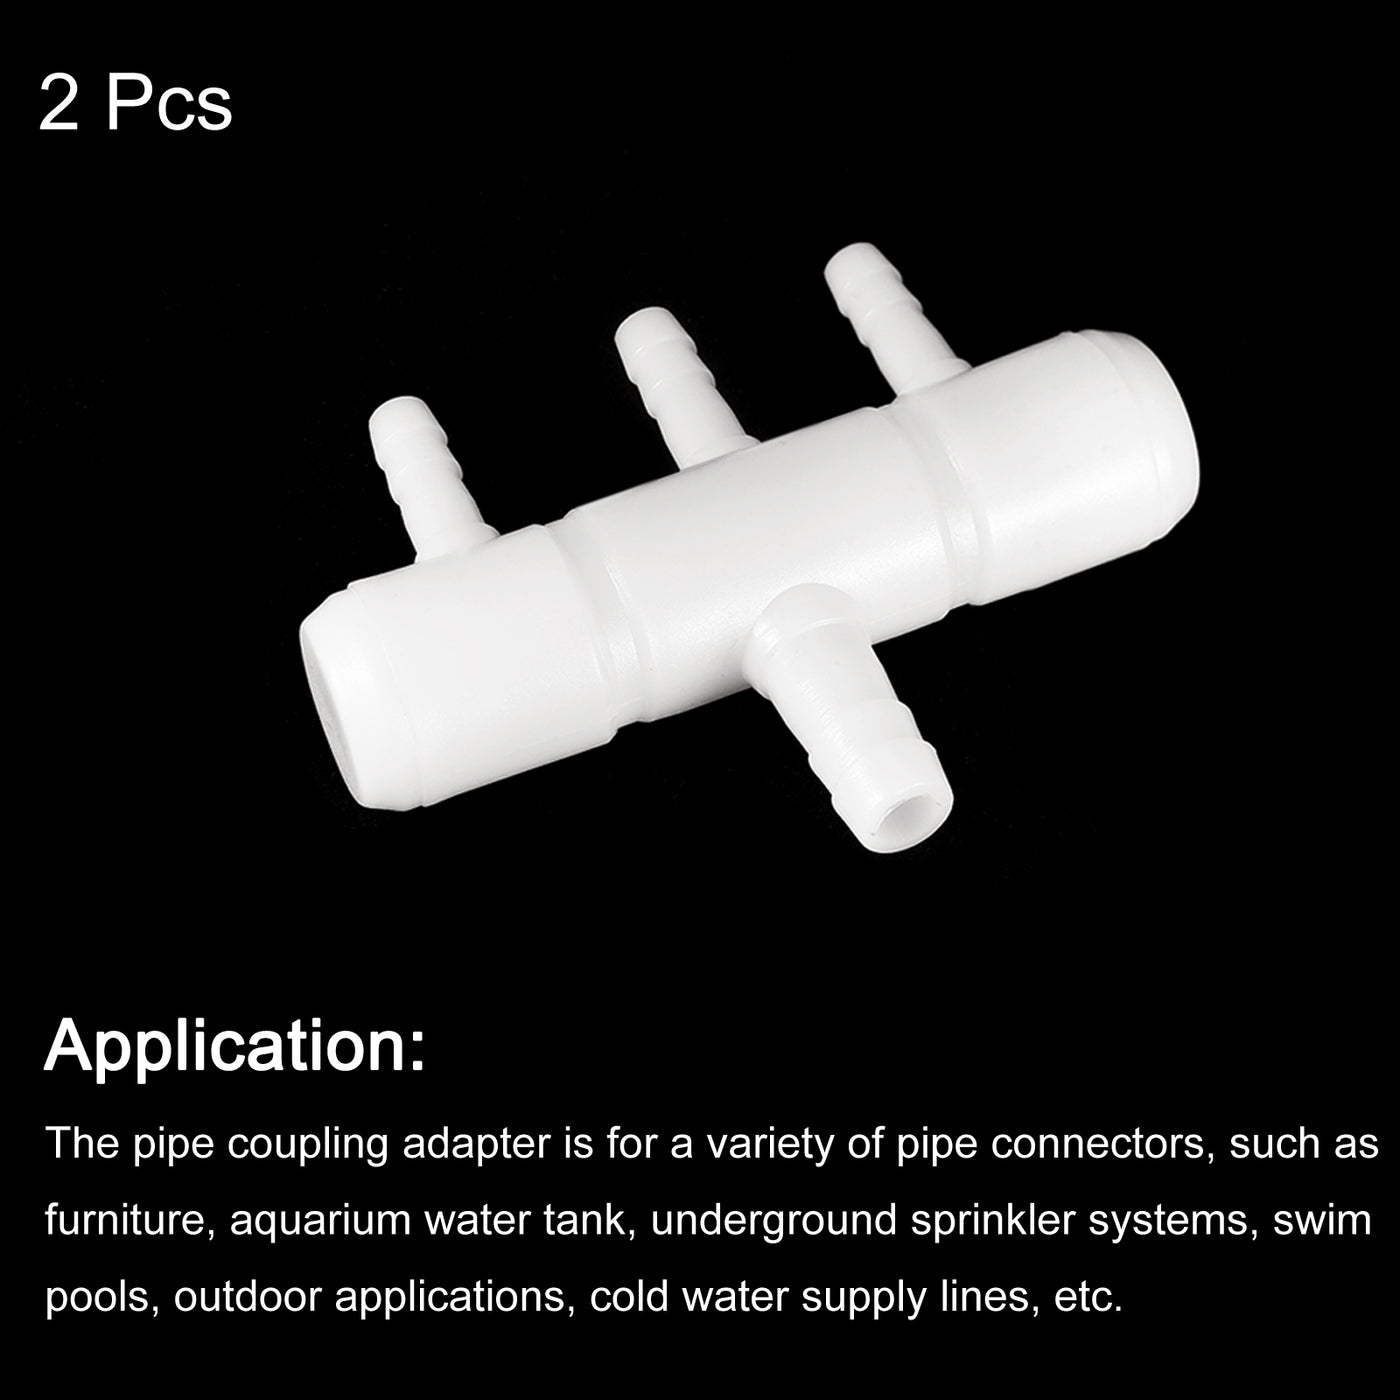 uxcell Uxcell Air Line Tubing Splitter Connector, 2Pcs 8mm/0.31" to 5mm/0.2" 3 Way, White